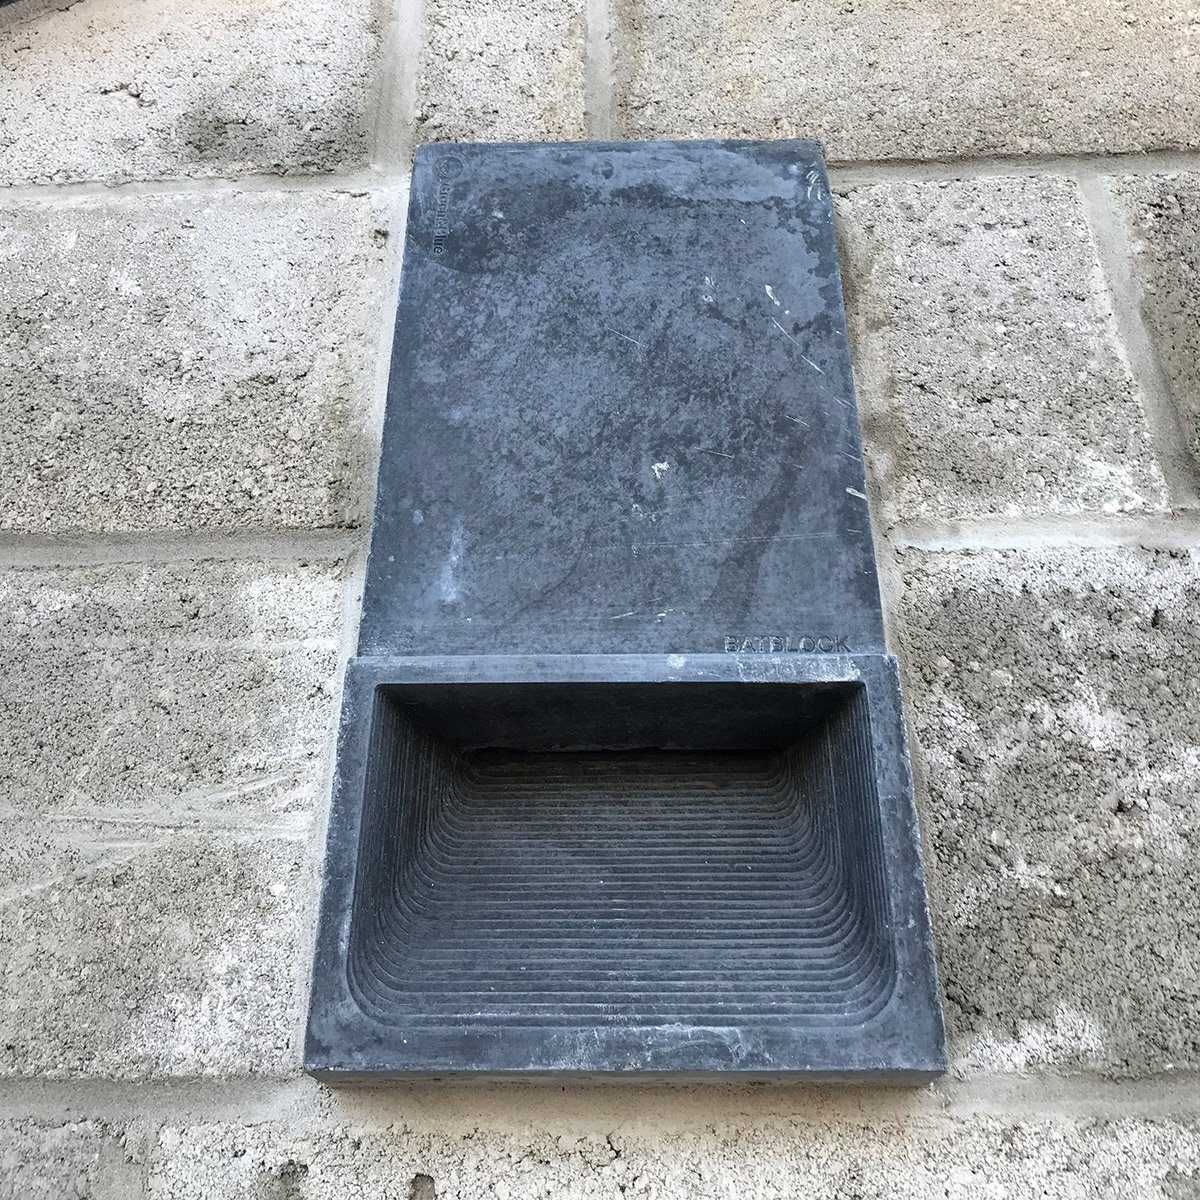 The entrance of a Bat Block. It is a concrete block that is retrofitted into an existing wall to allow bats to roost 